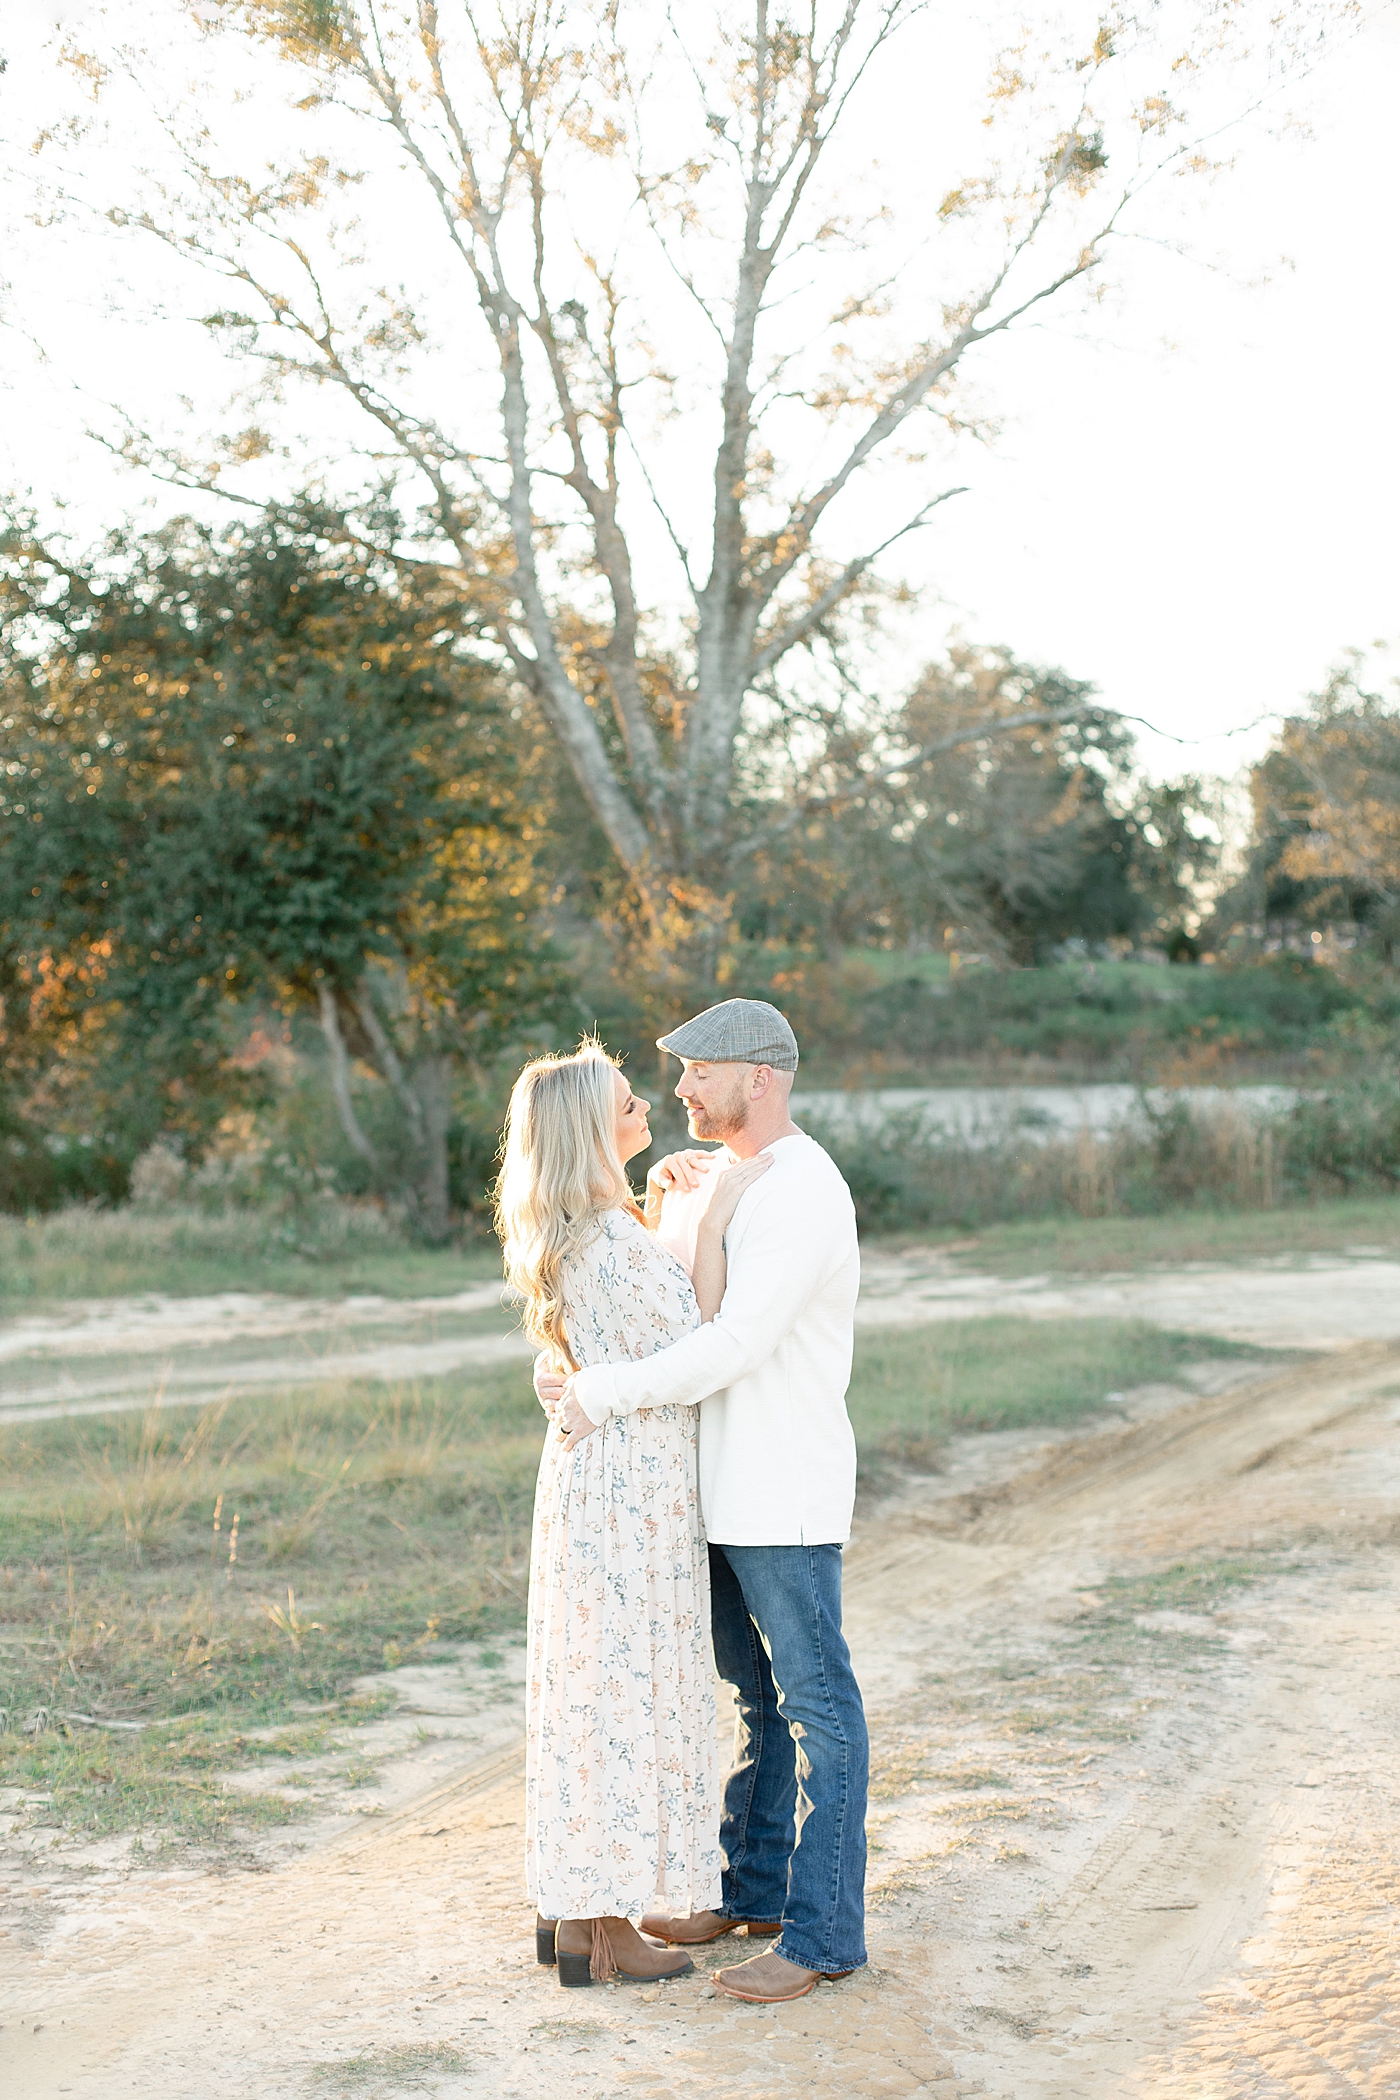 Mom and dad snuggling while walking a dirt path | Photo by Little Sunshine Photography